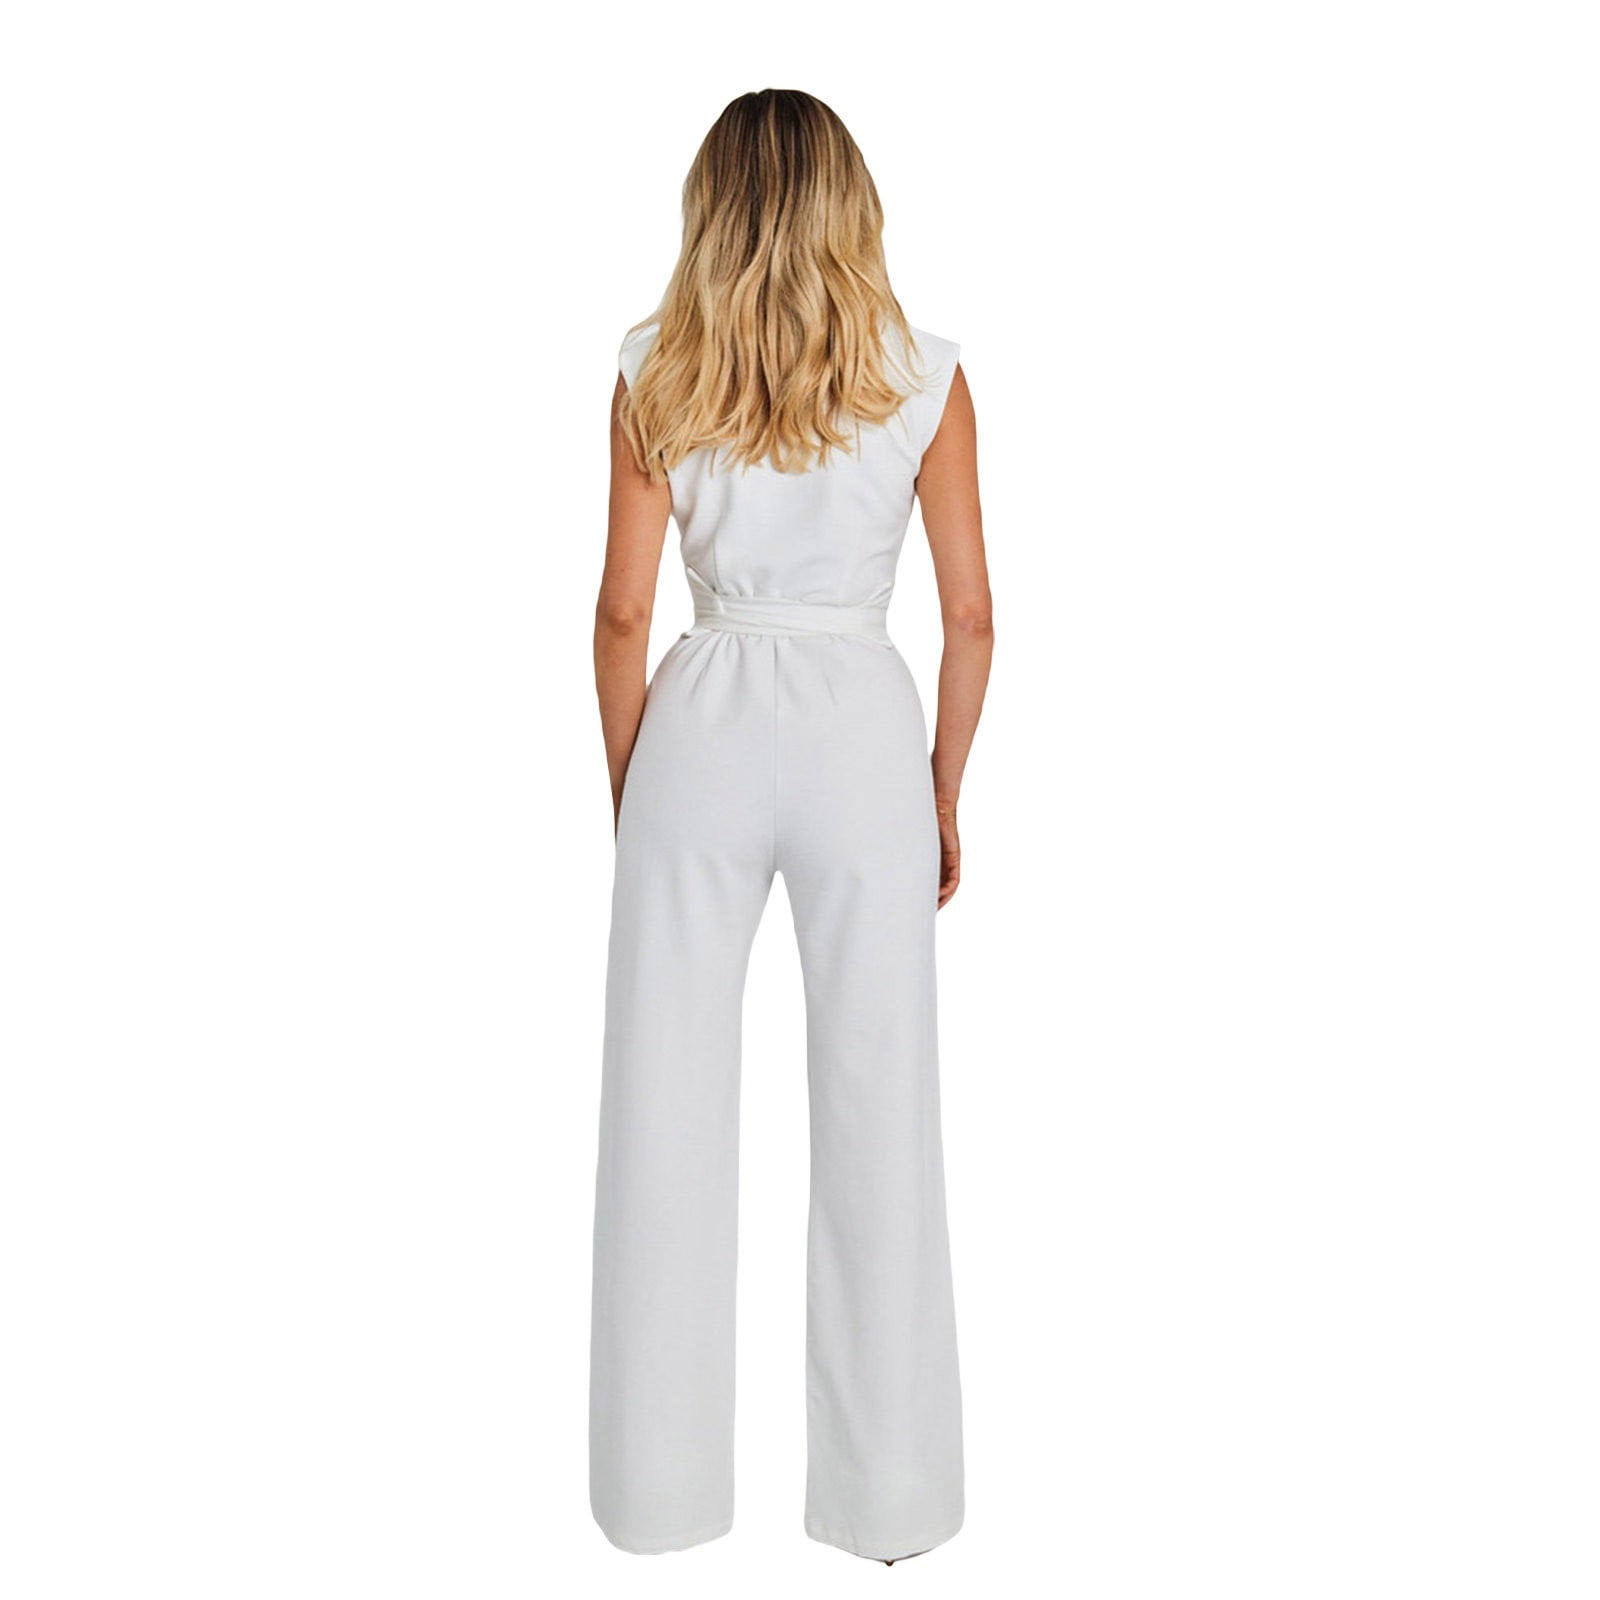 Dressy Rompers and Jumpsuits for Women Versatile Solid Color Fashionable  and Sexy Women's Sleeveless Slim Wide (A, S)